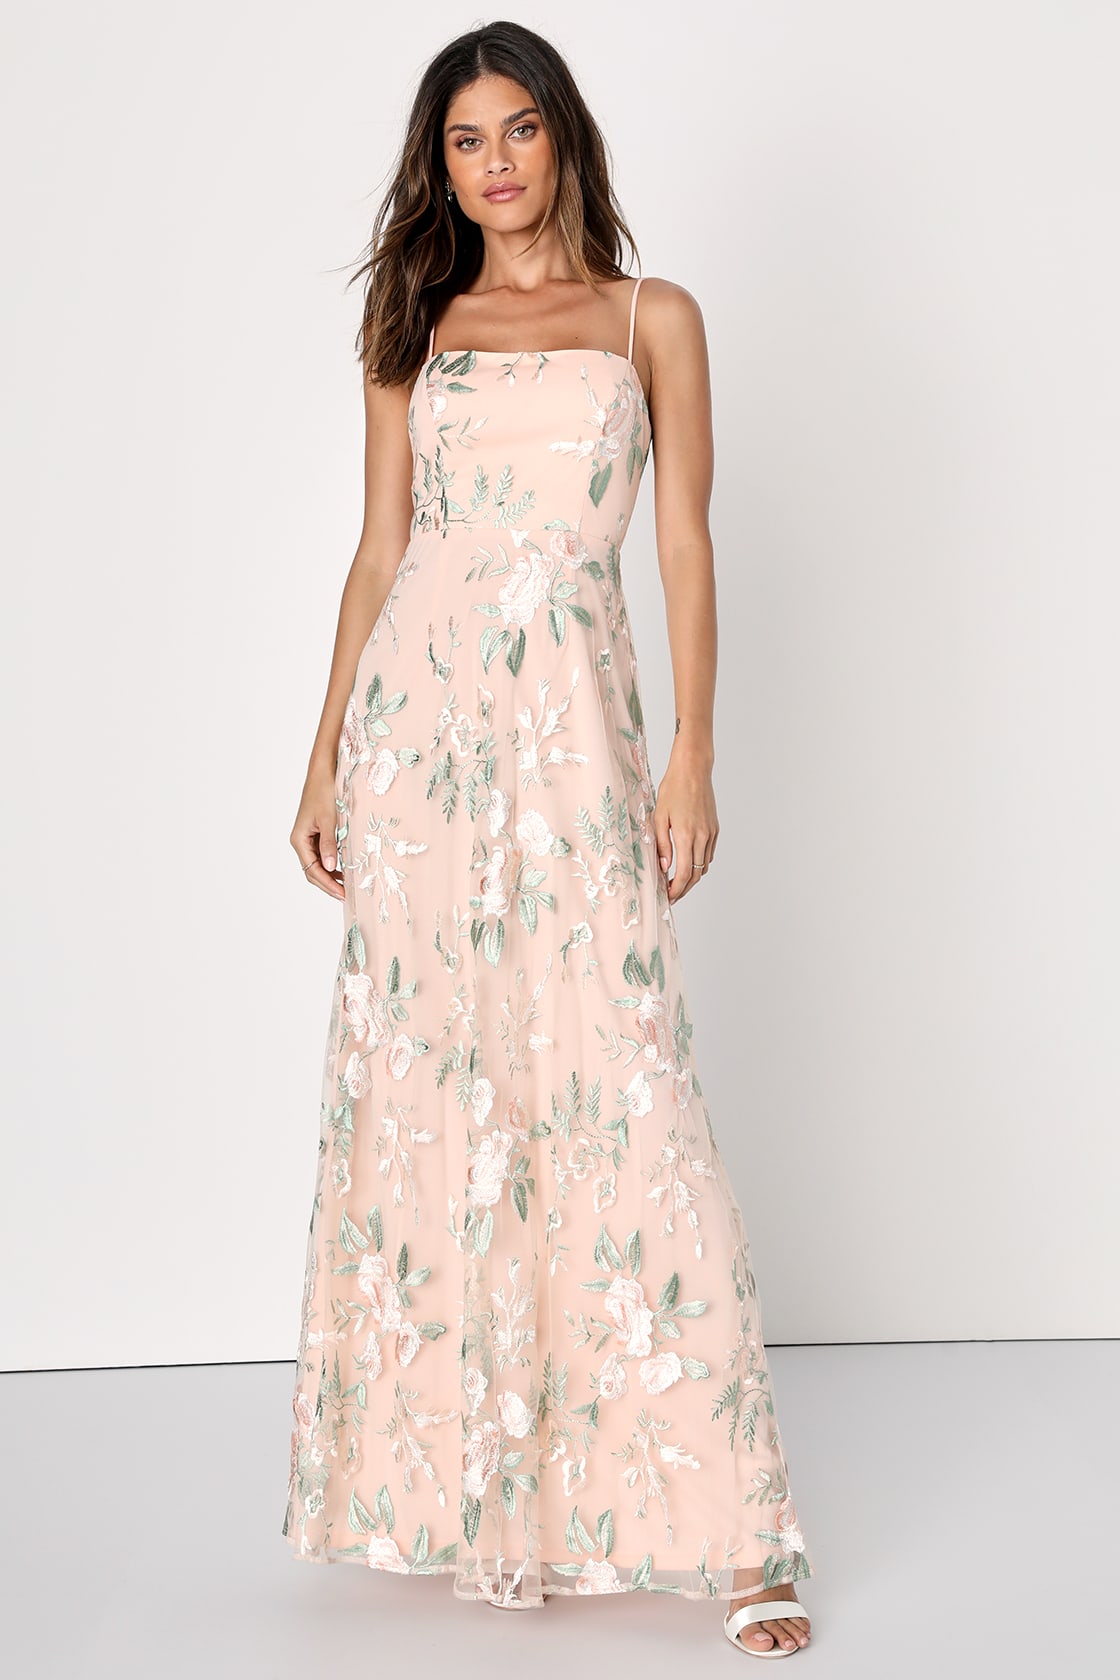 Budding Blossoms Blush Pink Floral Embroidered A-Line Maxi Dress